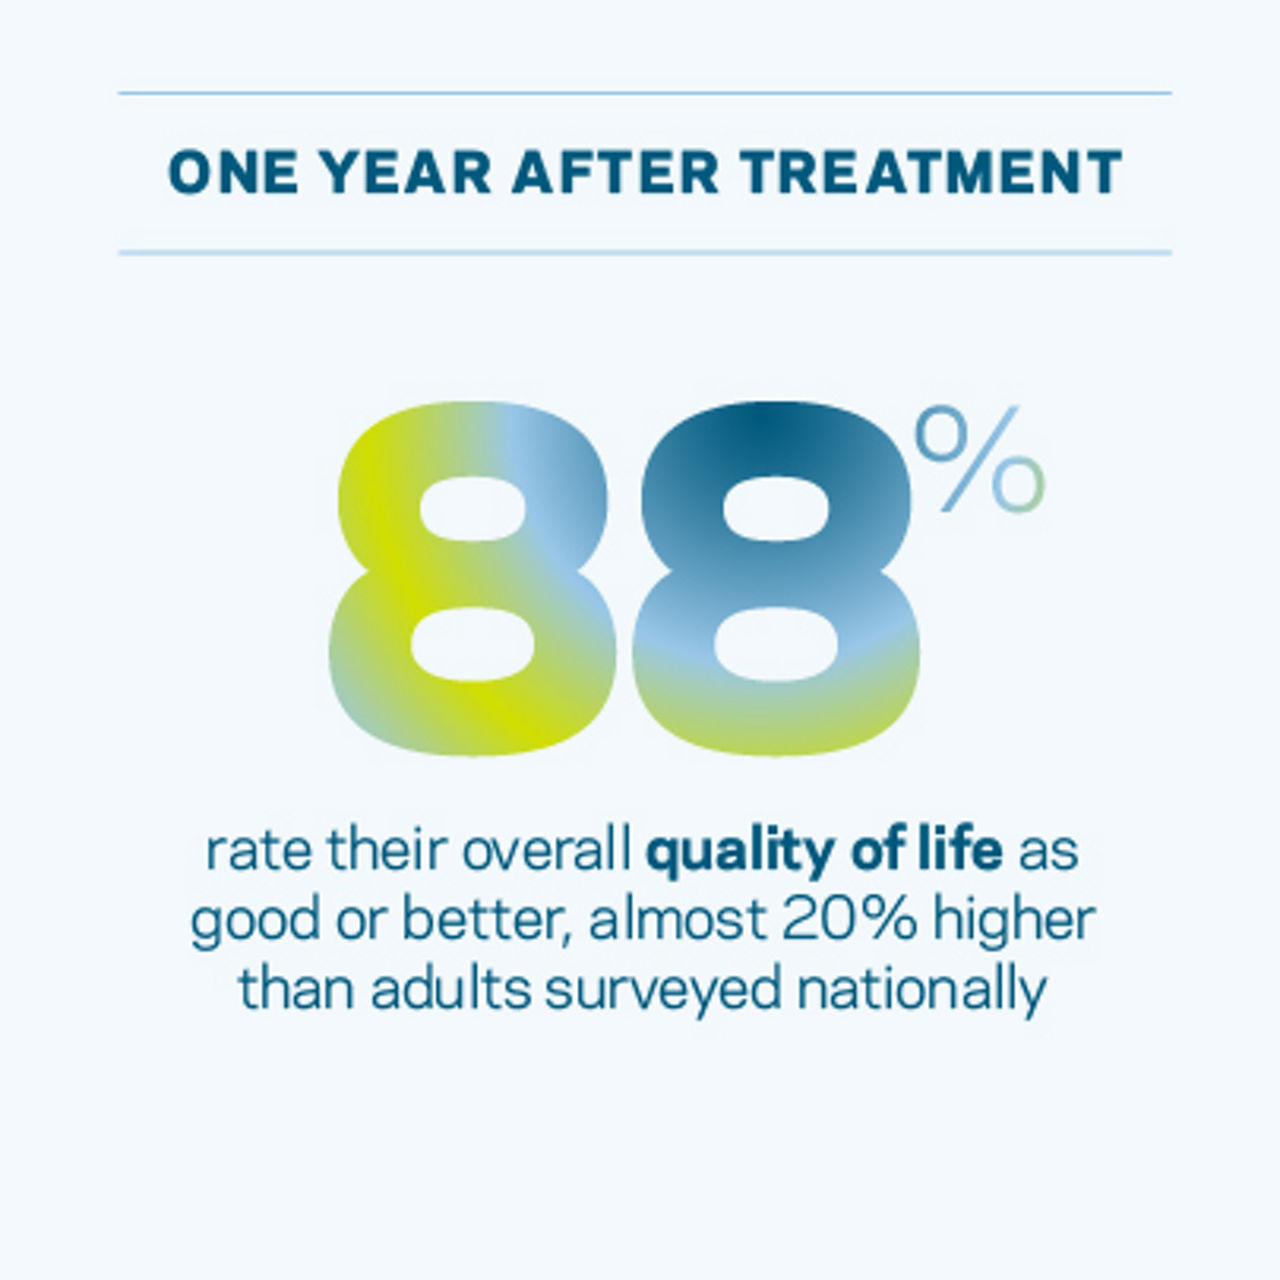 One year after treatment, 88 percent rate their overall quality of life as good or better, almost 20 percent higher than adults surveyed nationally